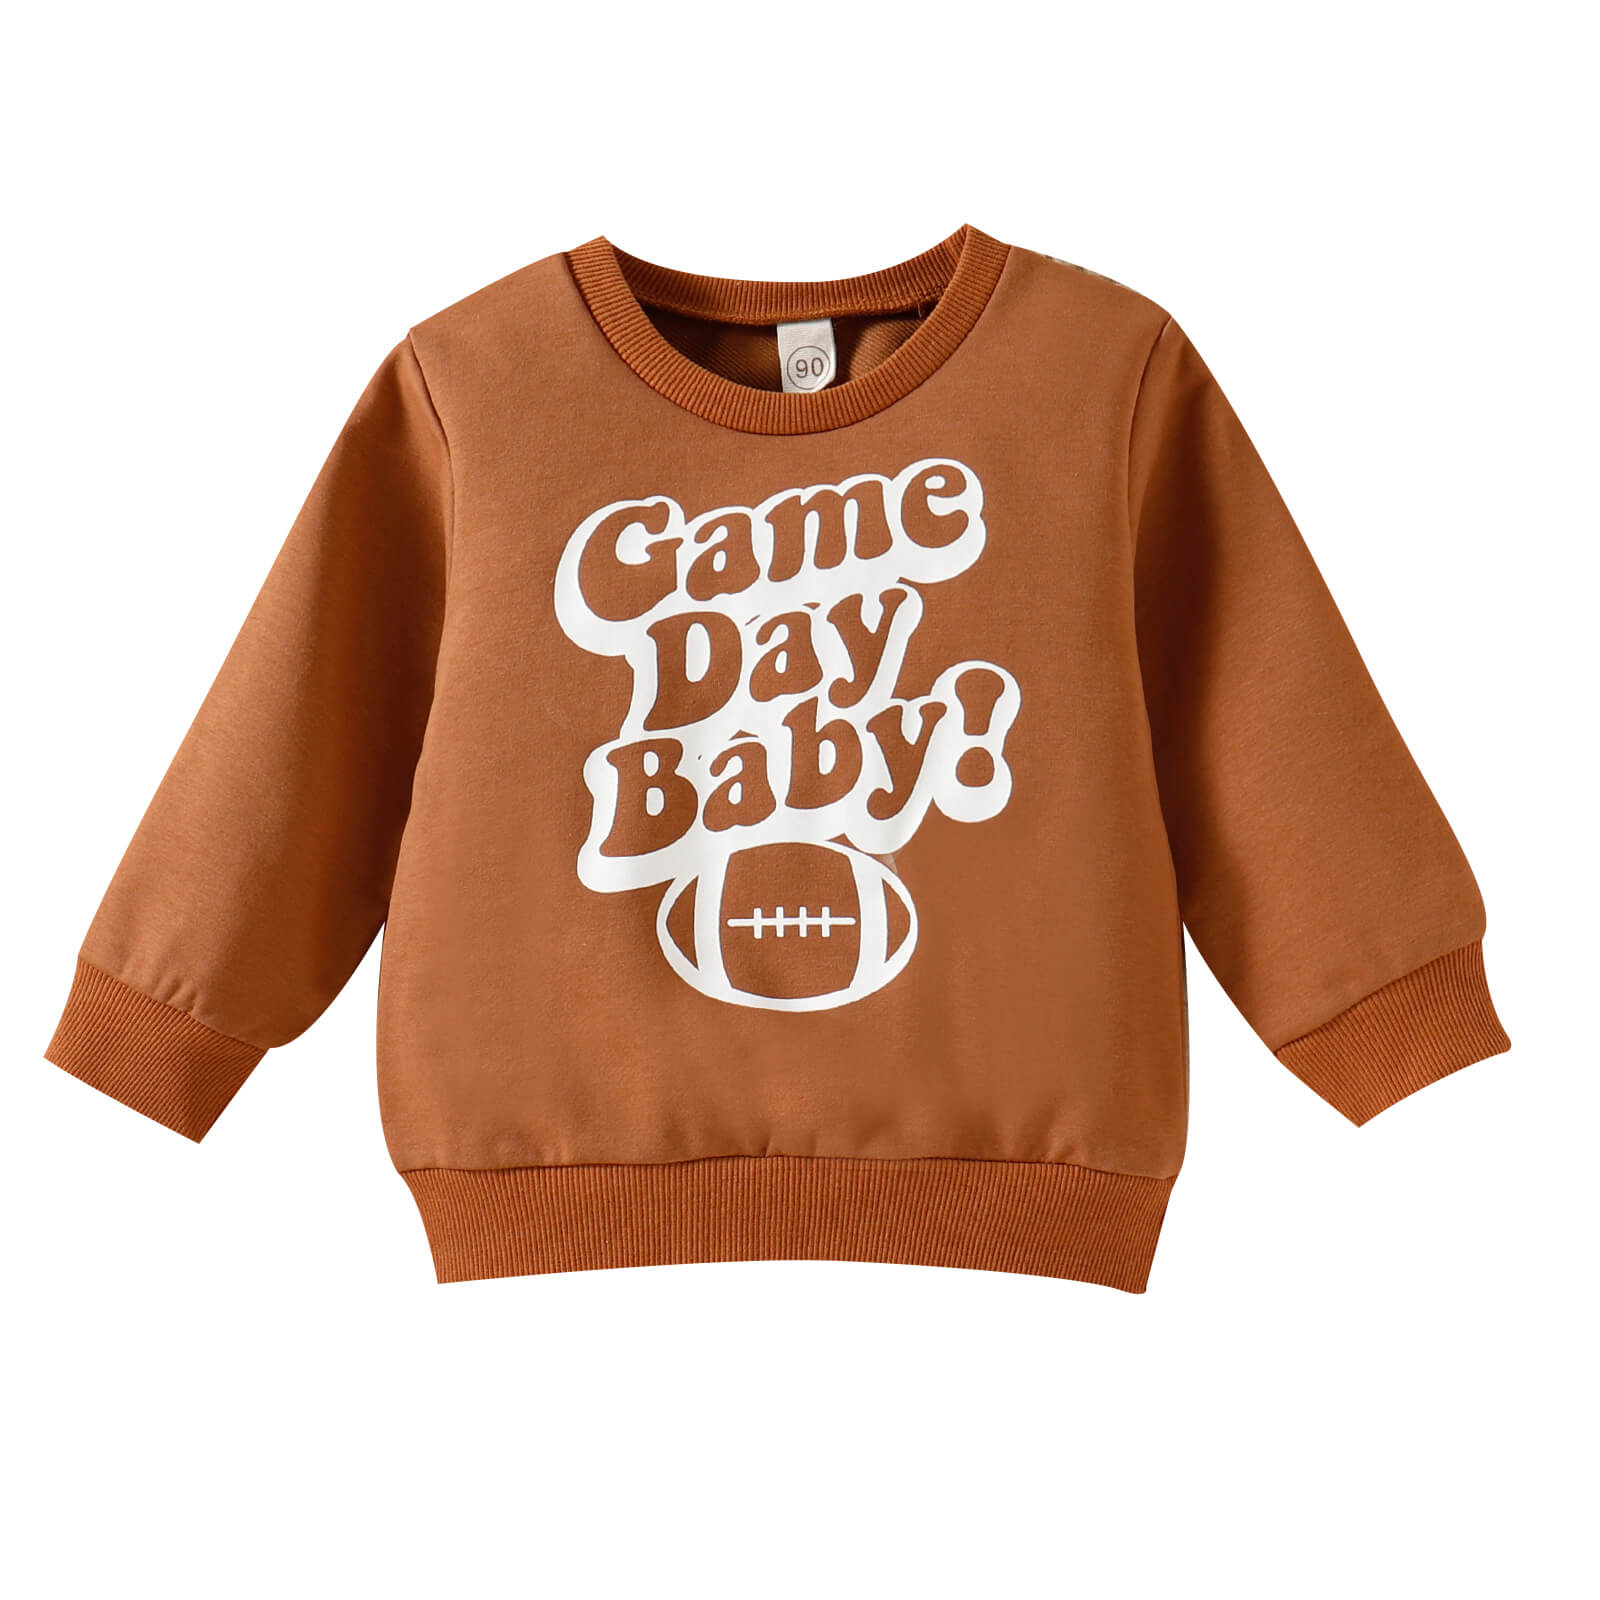 Kid Coffee Letter Pullover.